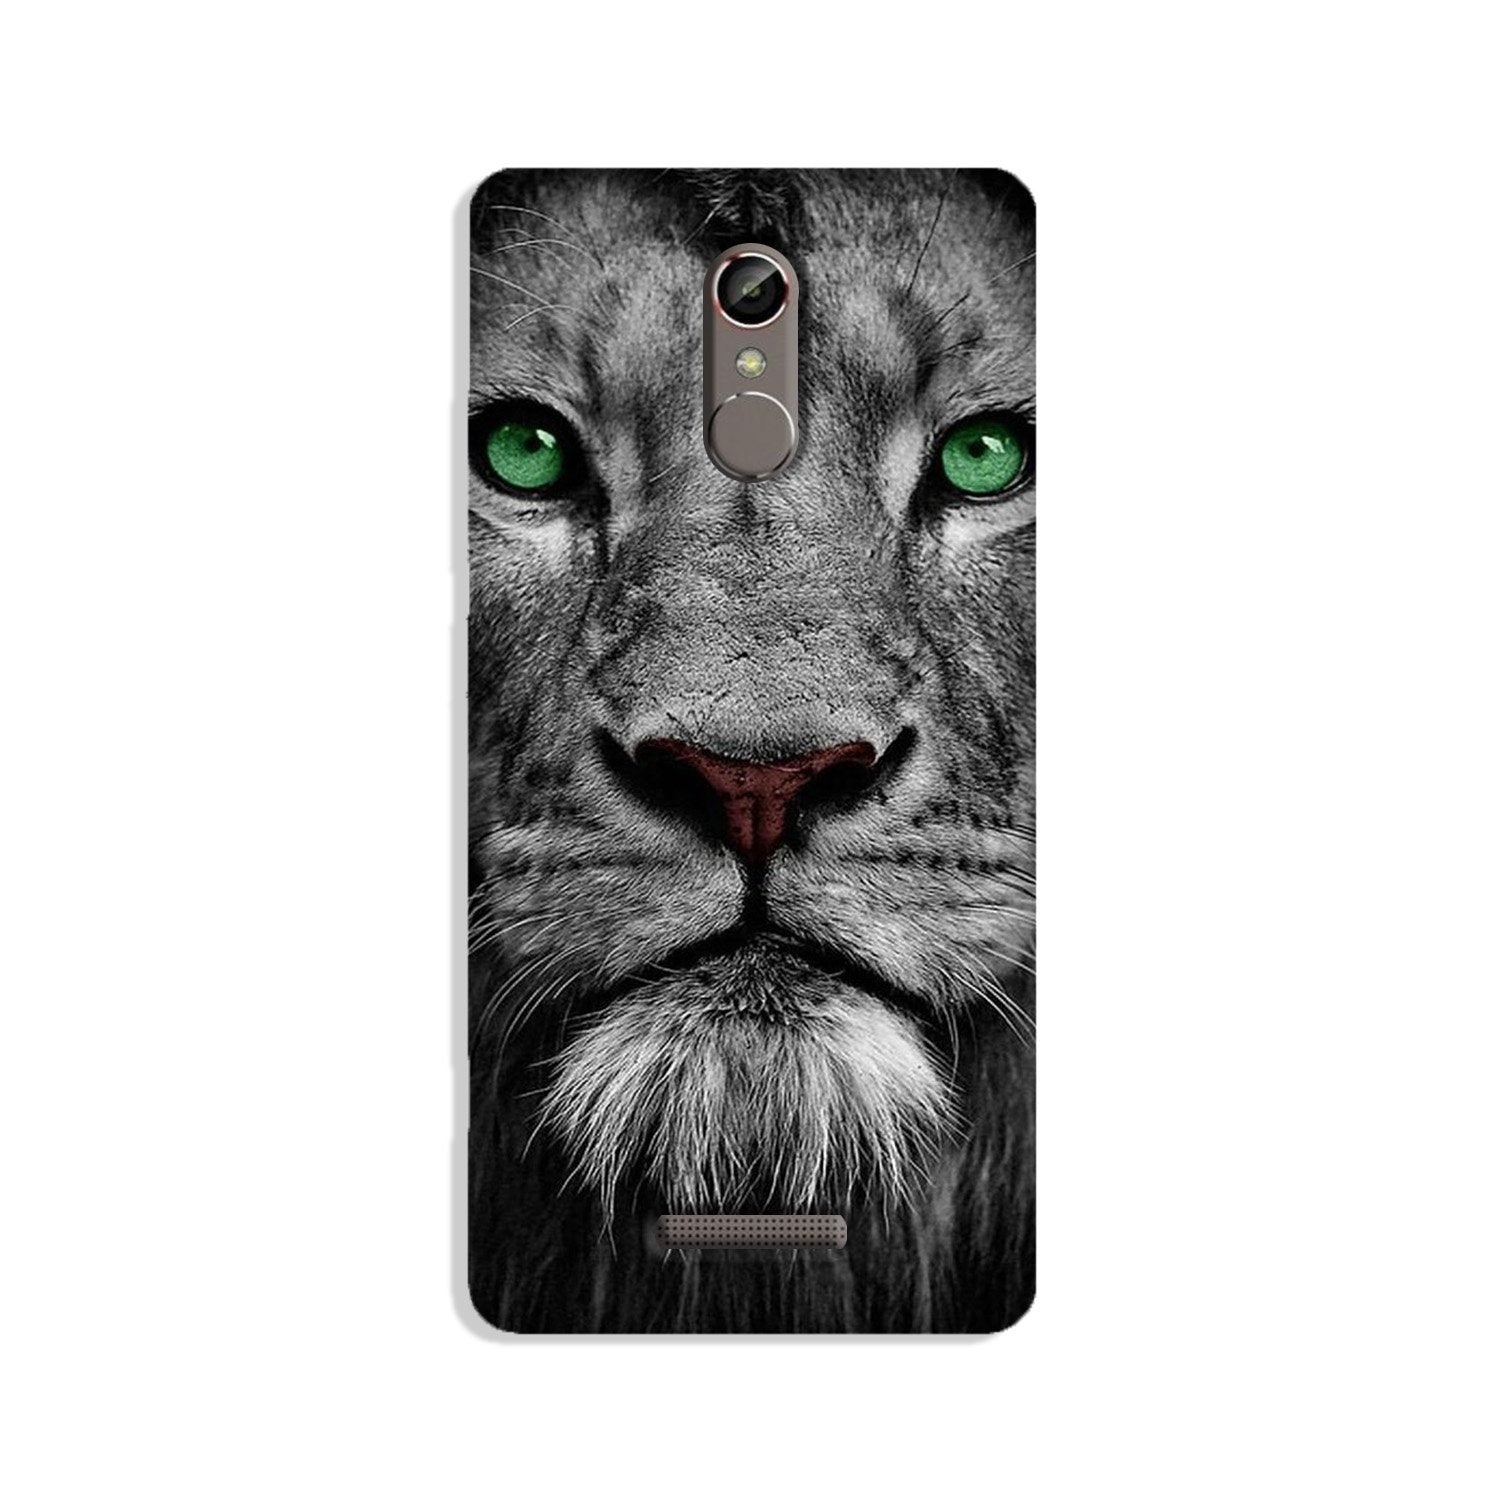 Lion Case for Gionee S6s (Design No. 272)